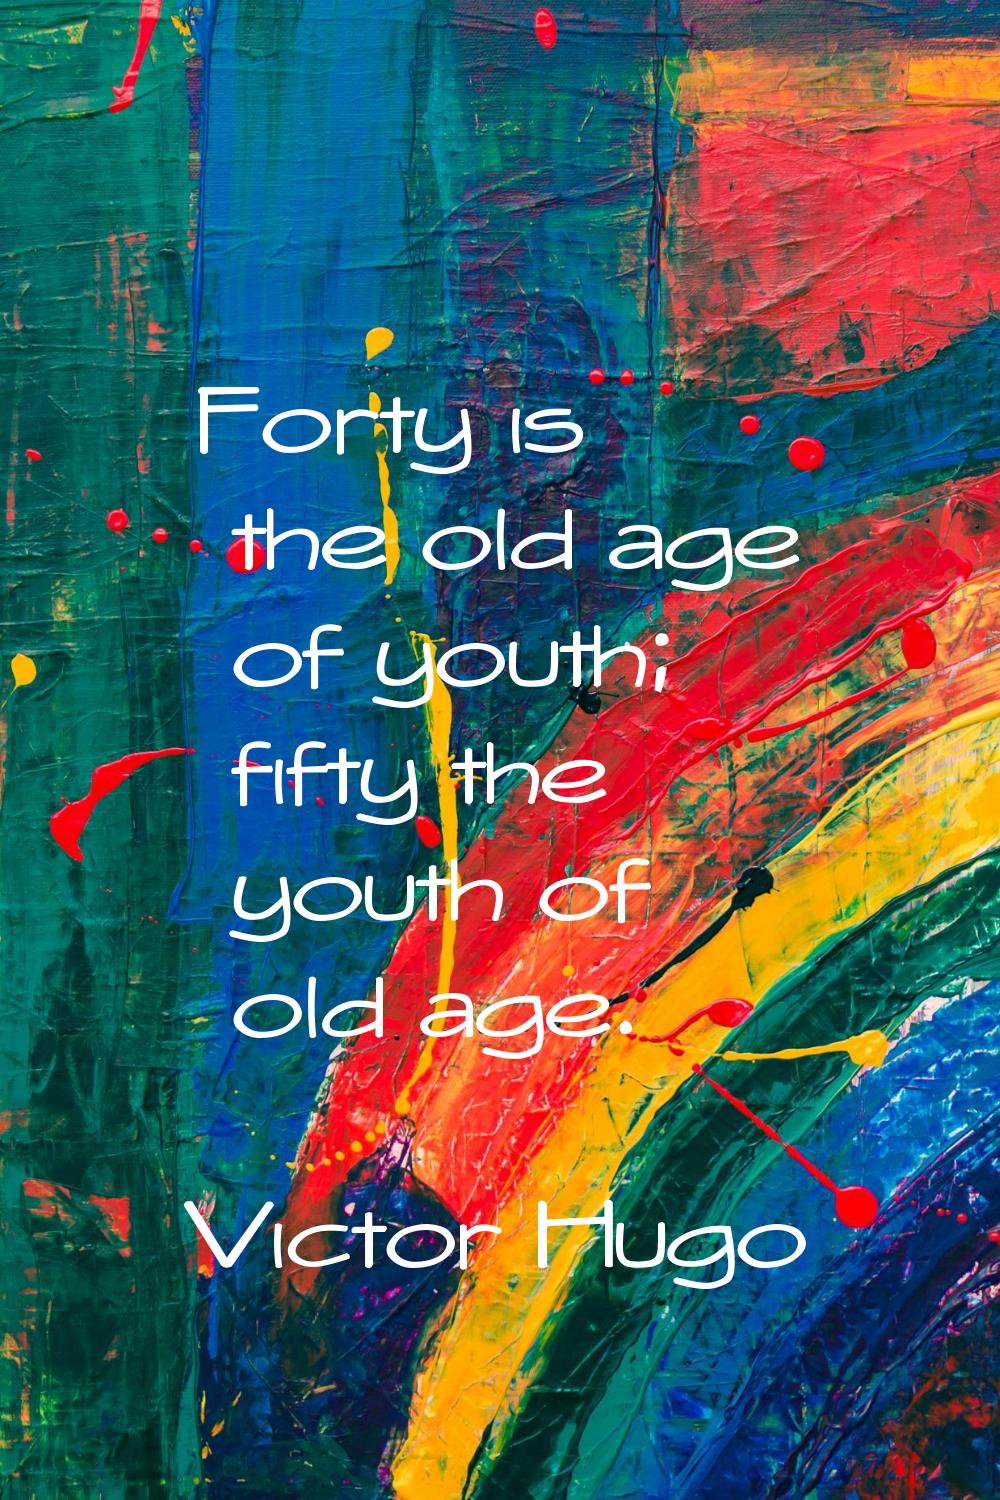 Forty is the old age of youth; fifty the youth of old age.